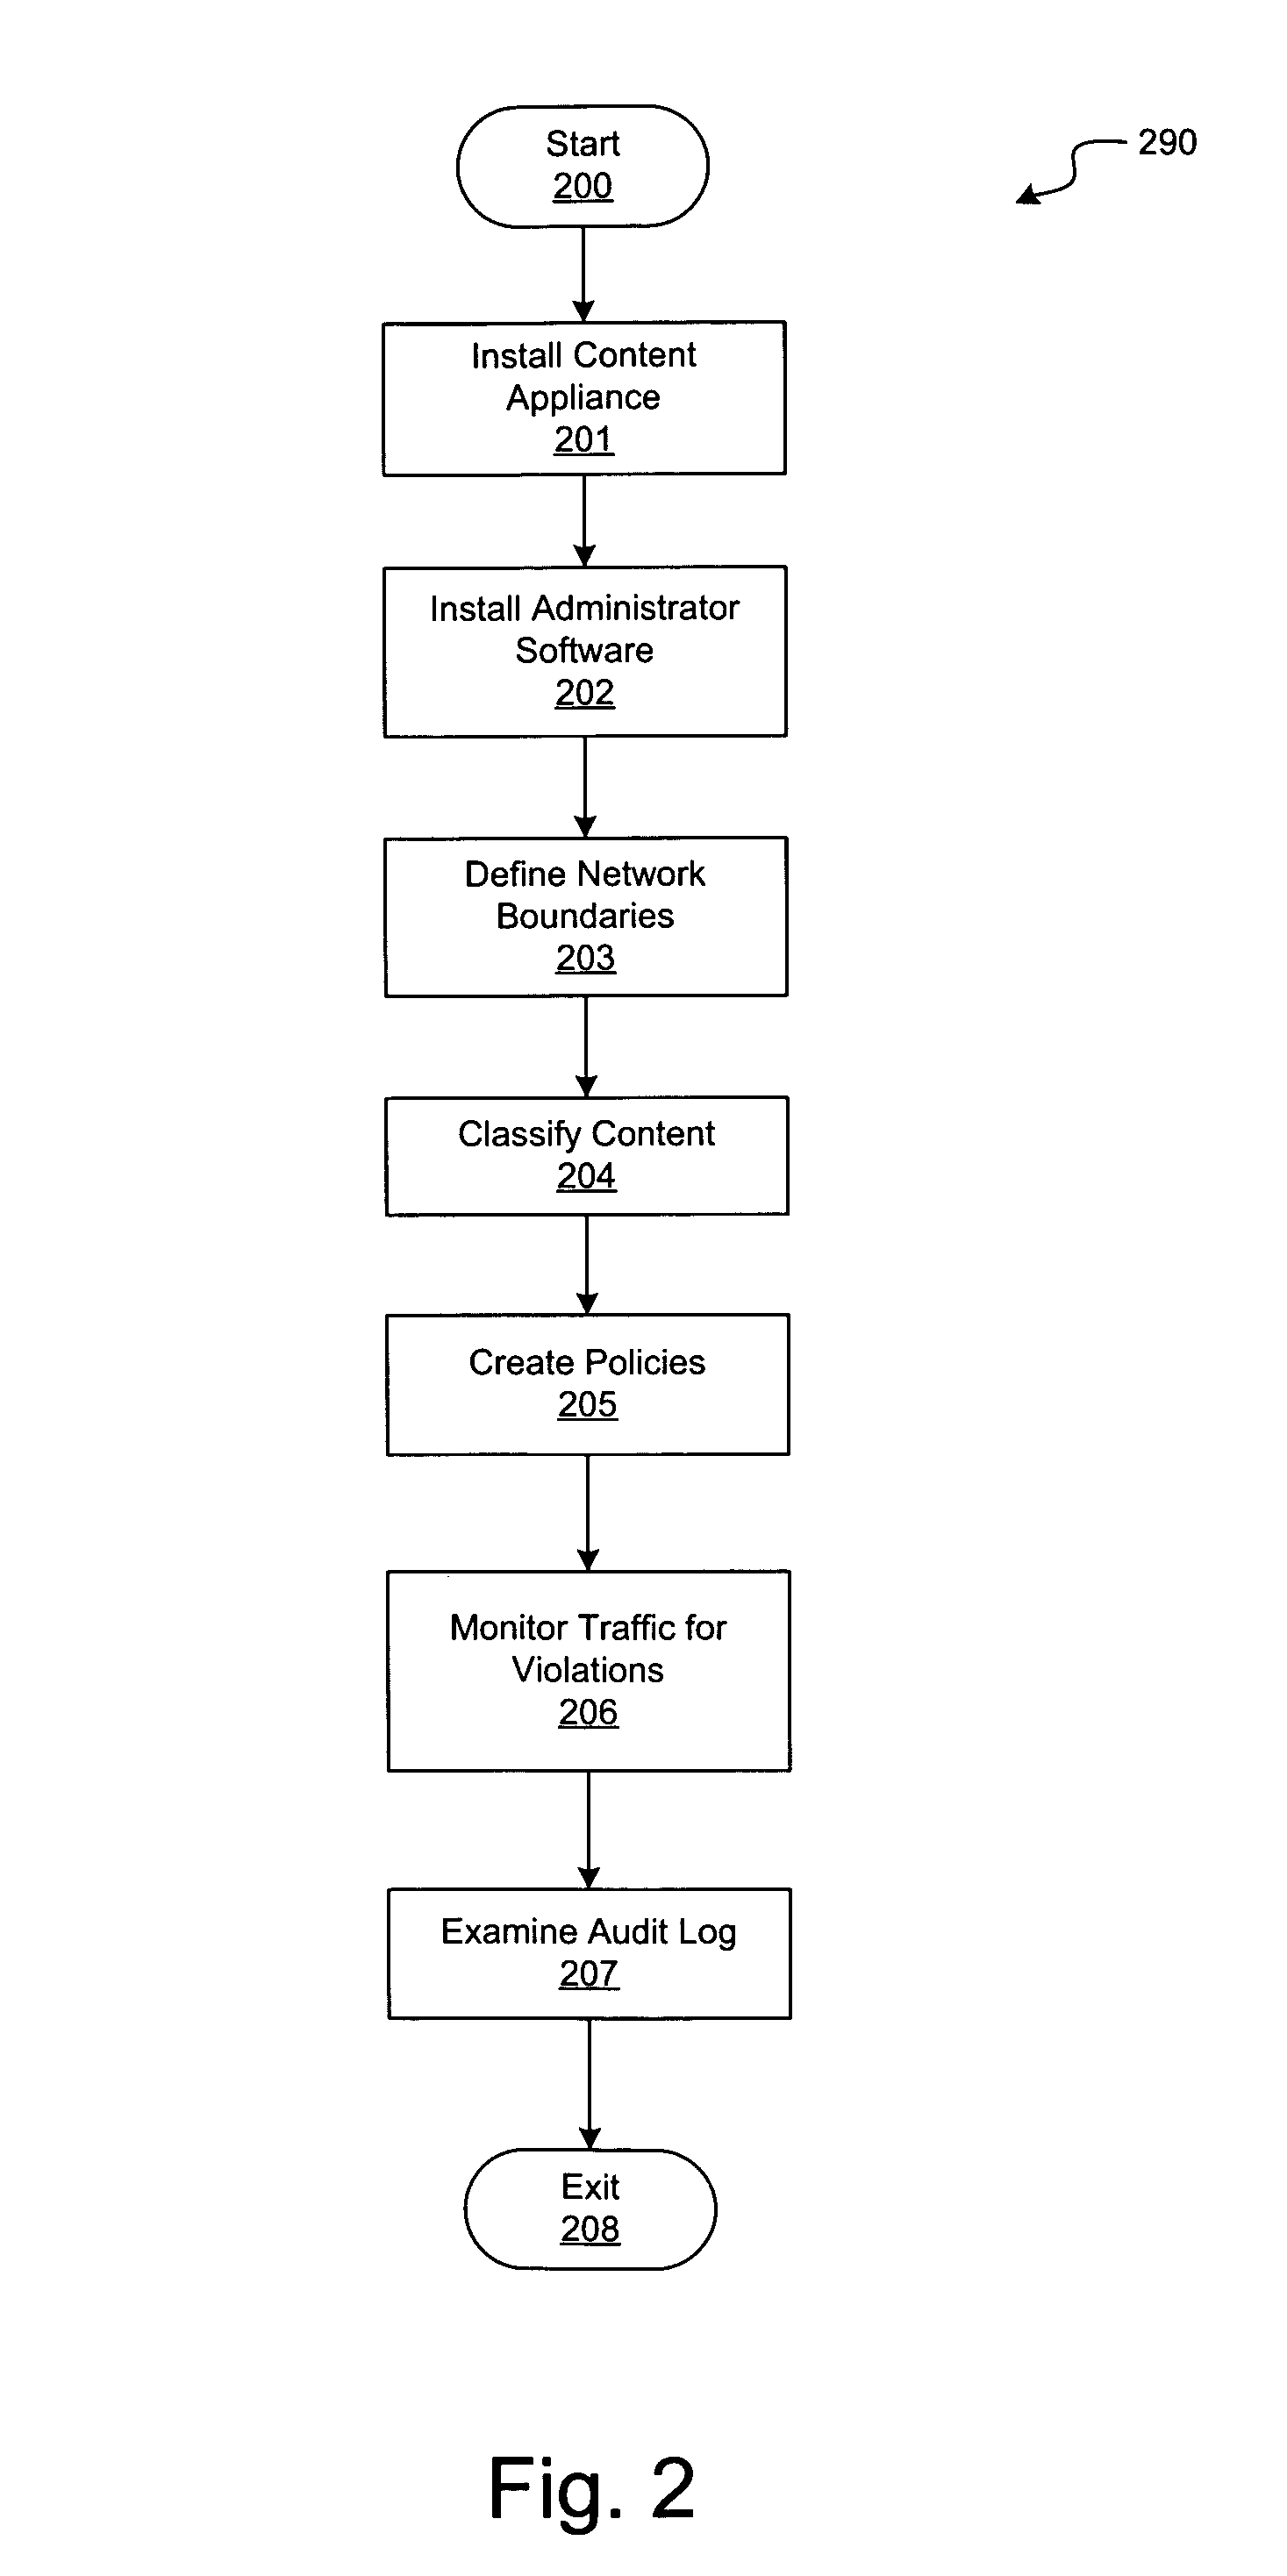 Partial document content matching using sectional analysis